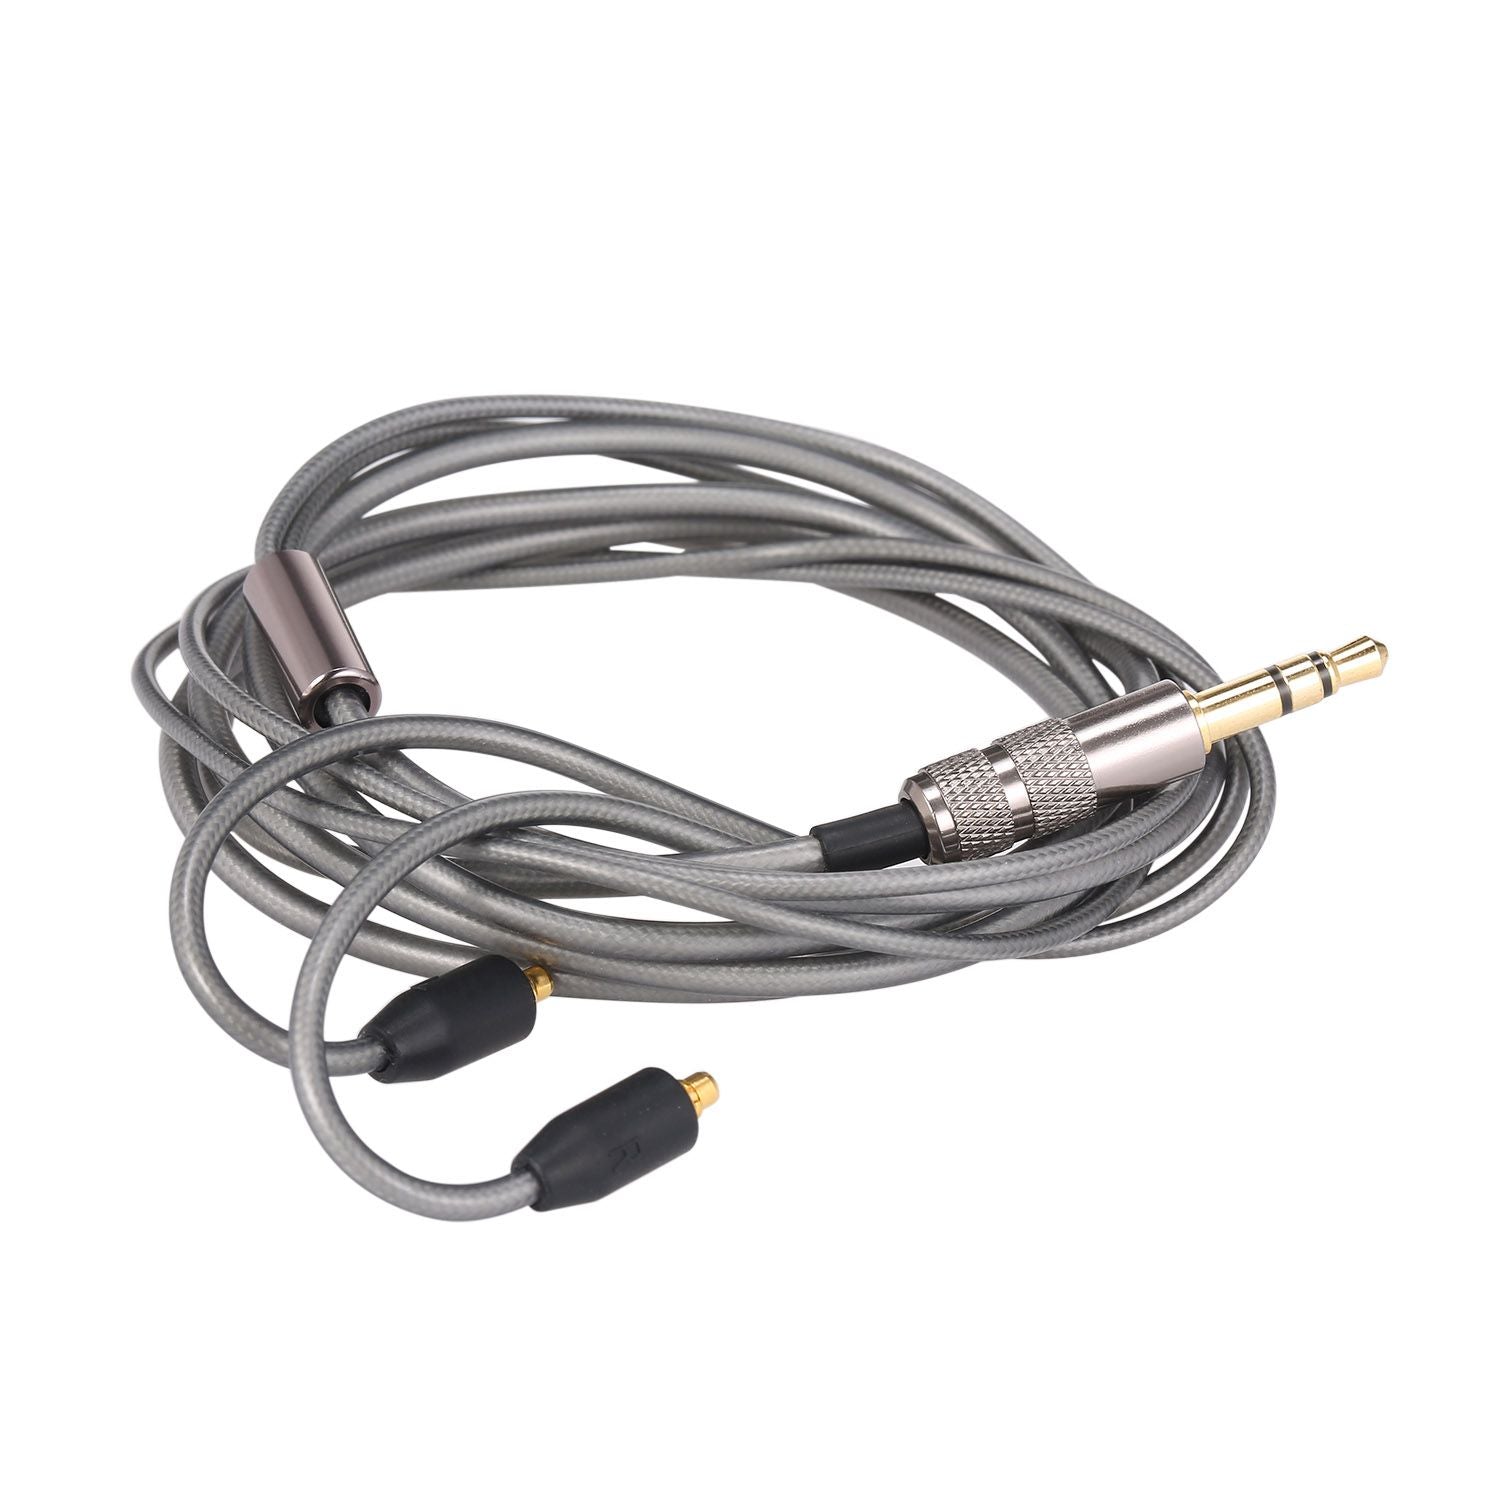 MMCX Connector Replacement Headphone Cable 3.5mm Wired